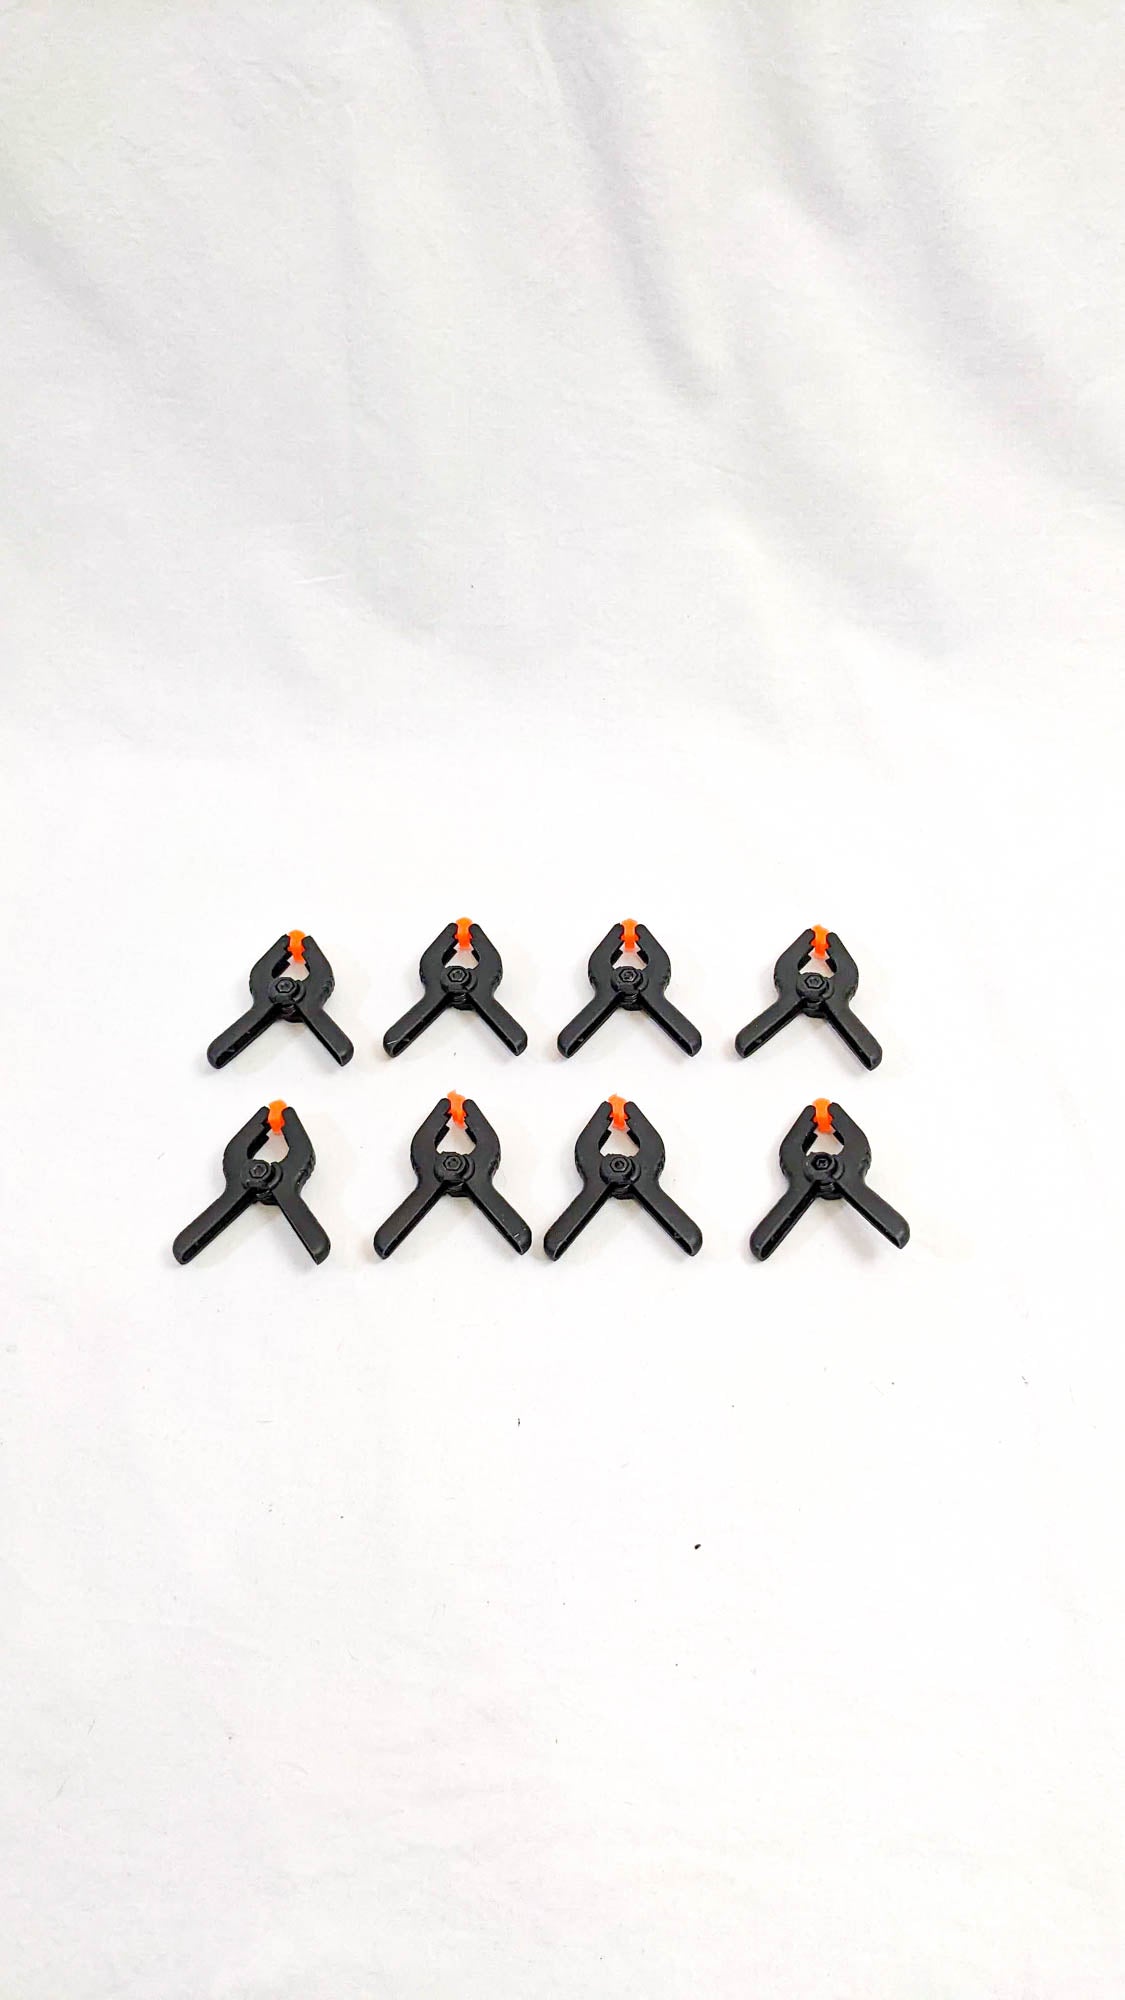 Plastic Clamps 2-inch set of 8